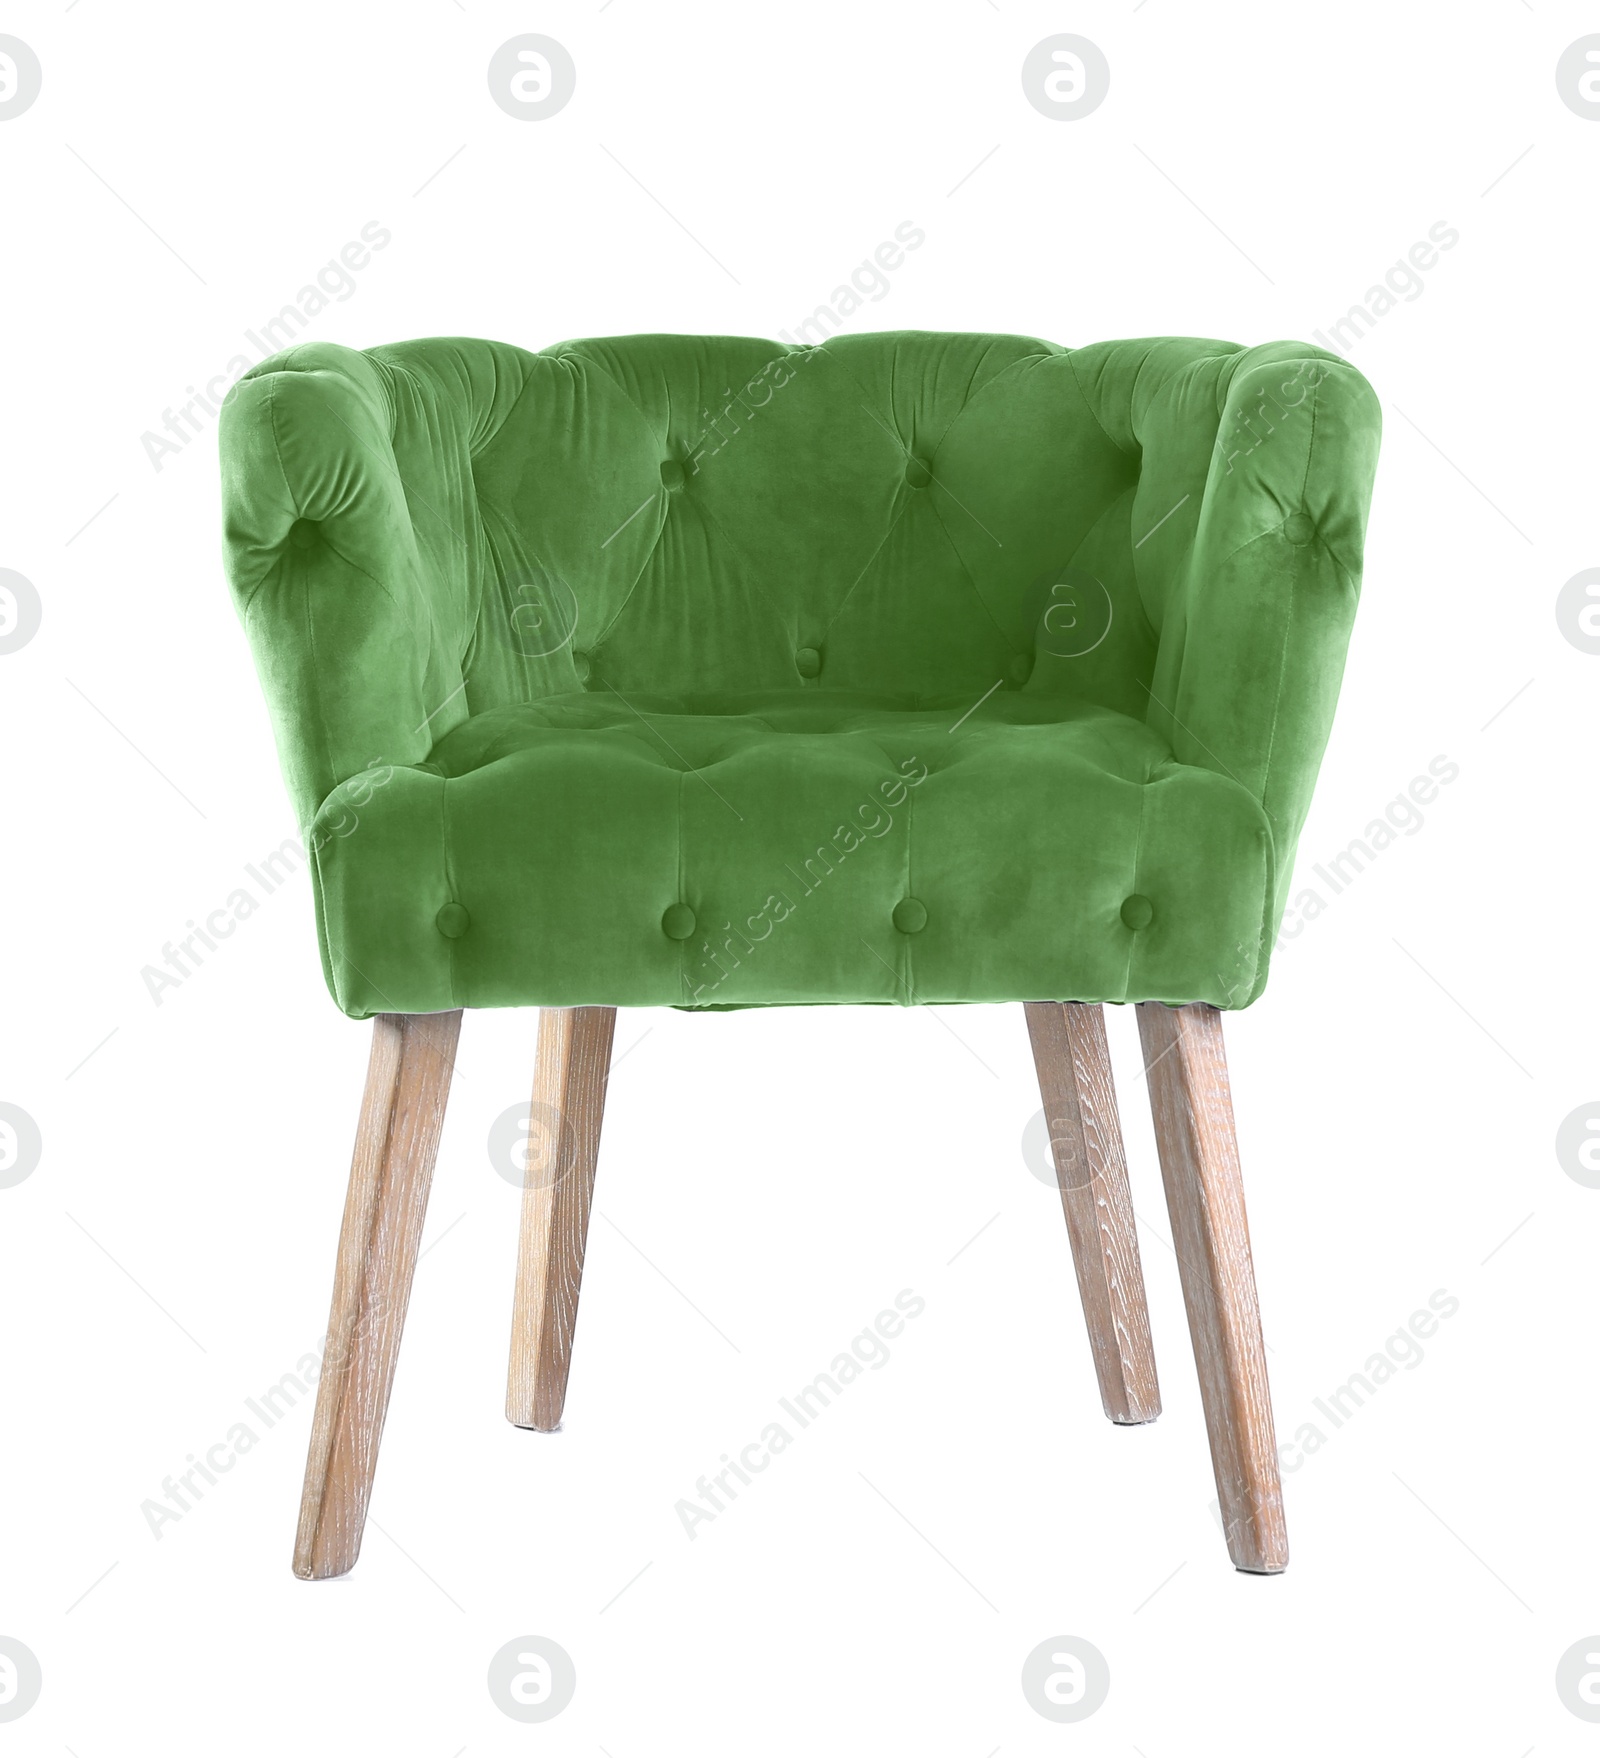 Image of One comfortable green armchair isolated on white